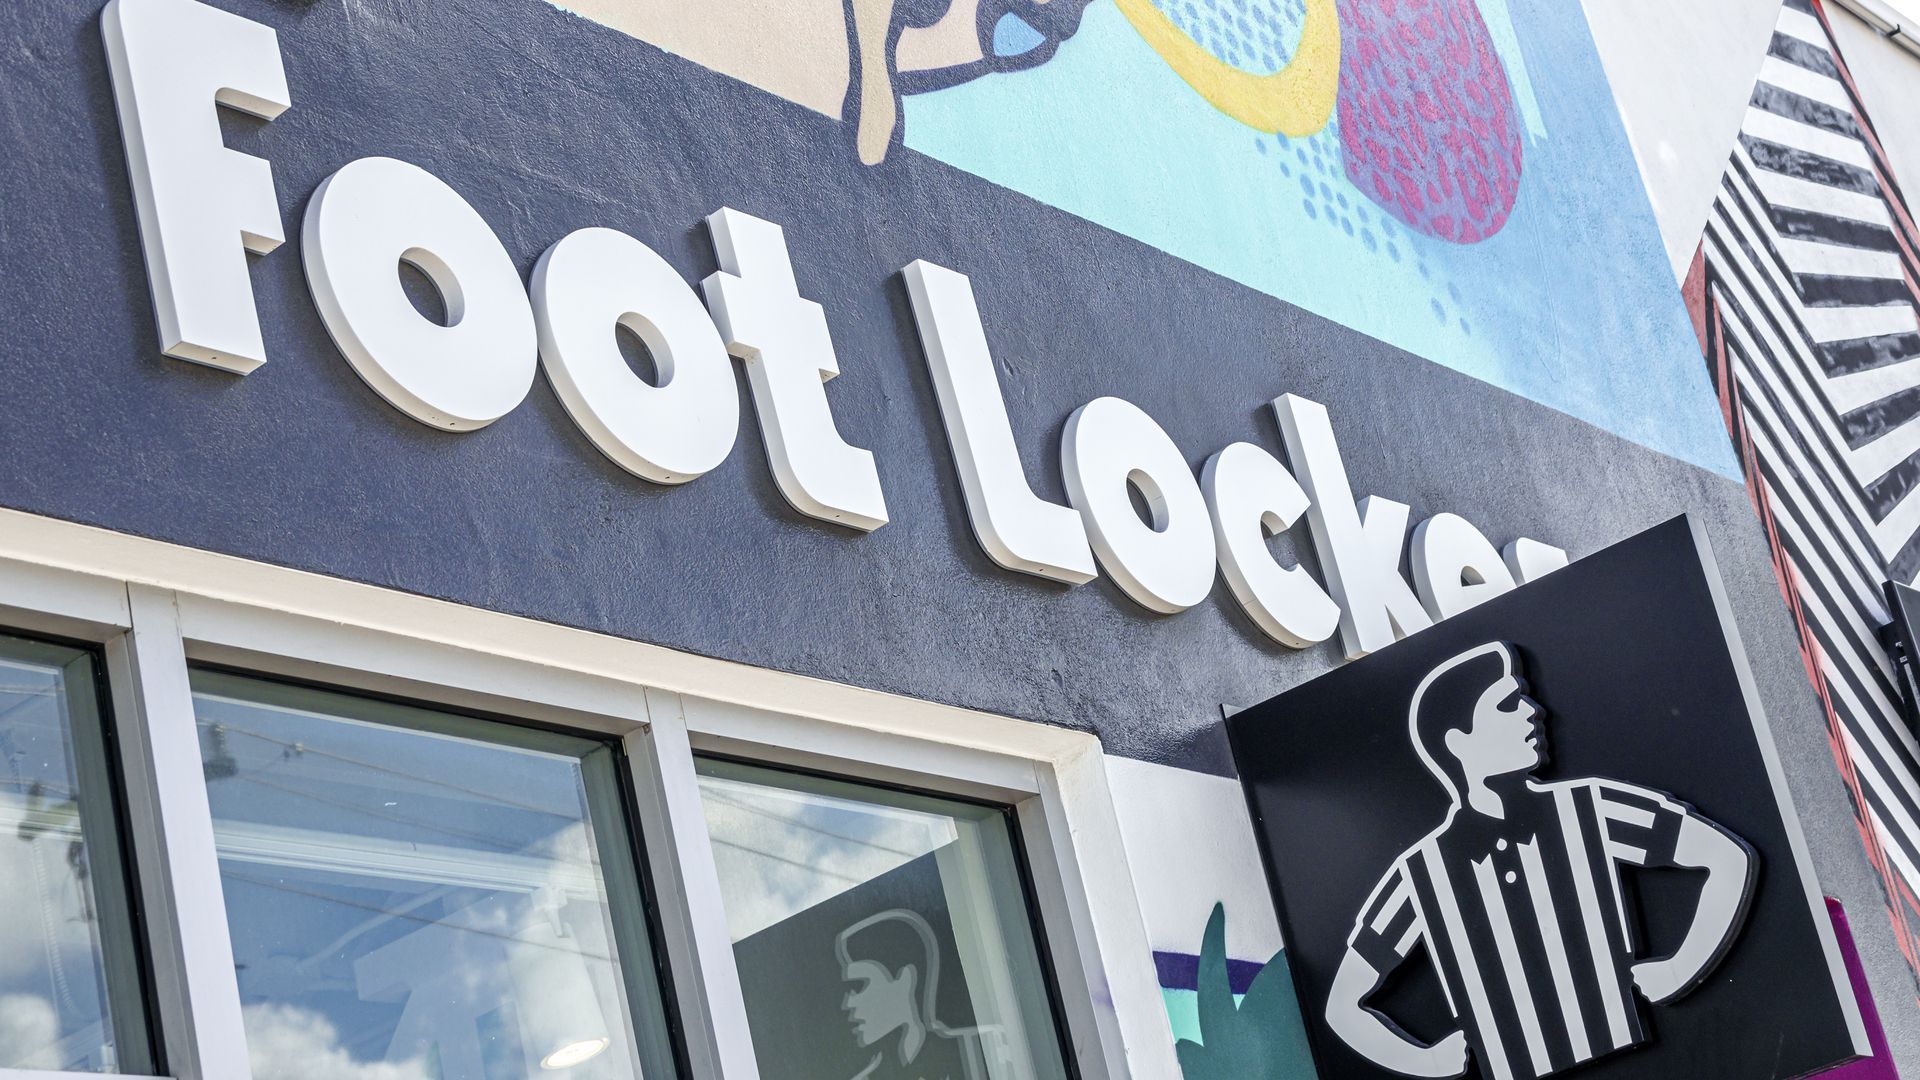 Foot Locker, spelled out in white lettering on a black backdrop, appears above a windowed entrance to one of the retailer's locations.